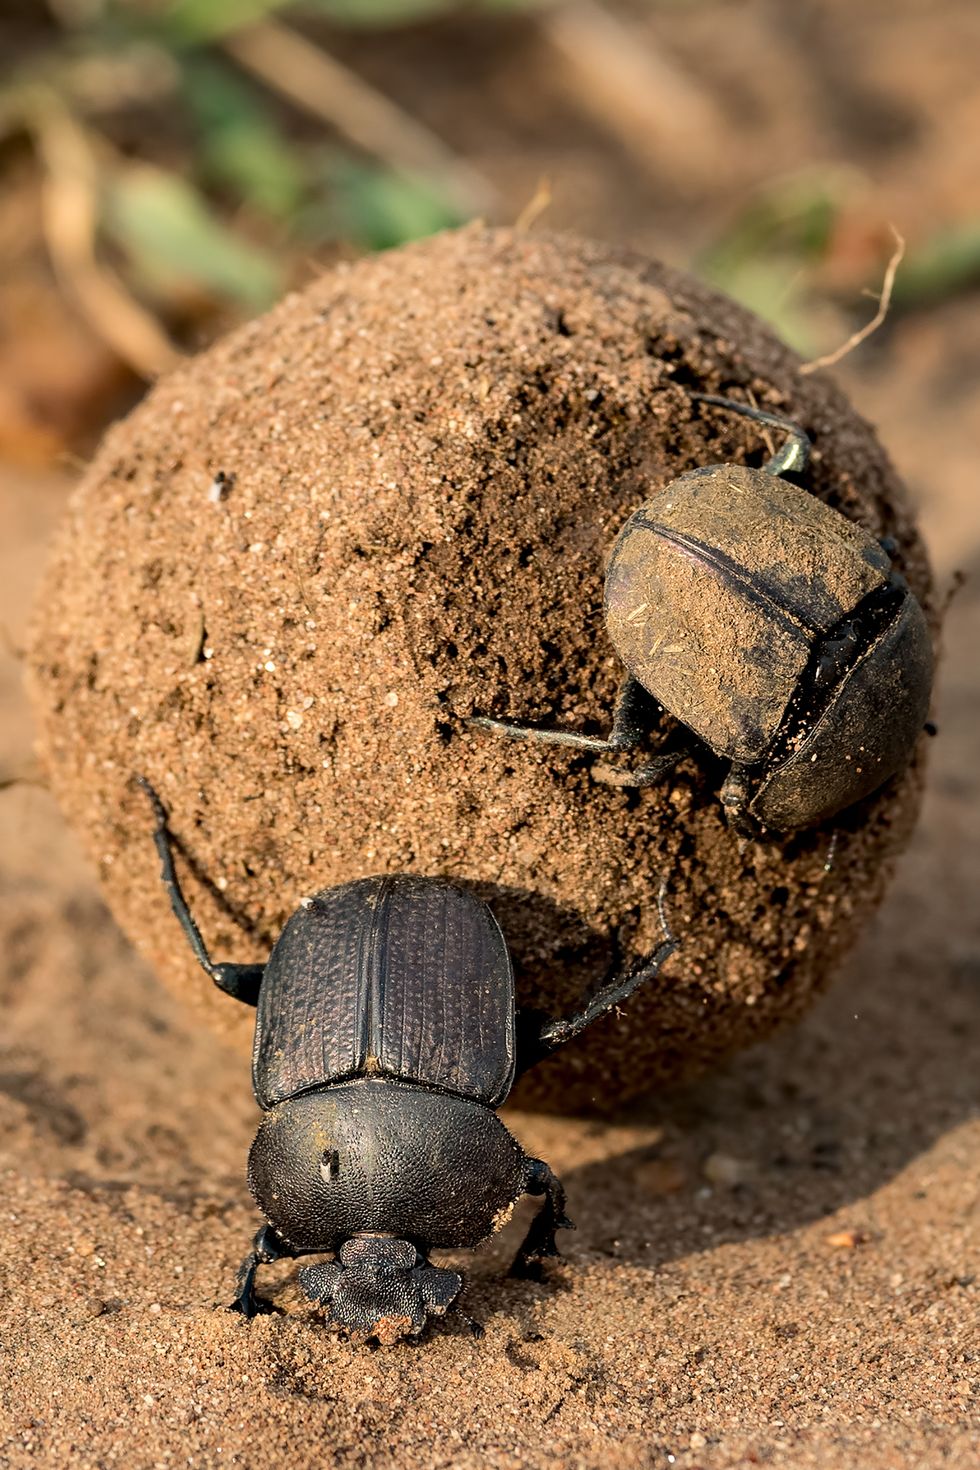 dung beetles rolling around on a pile of dung